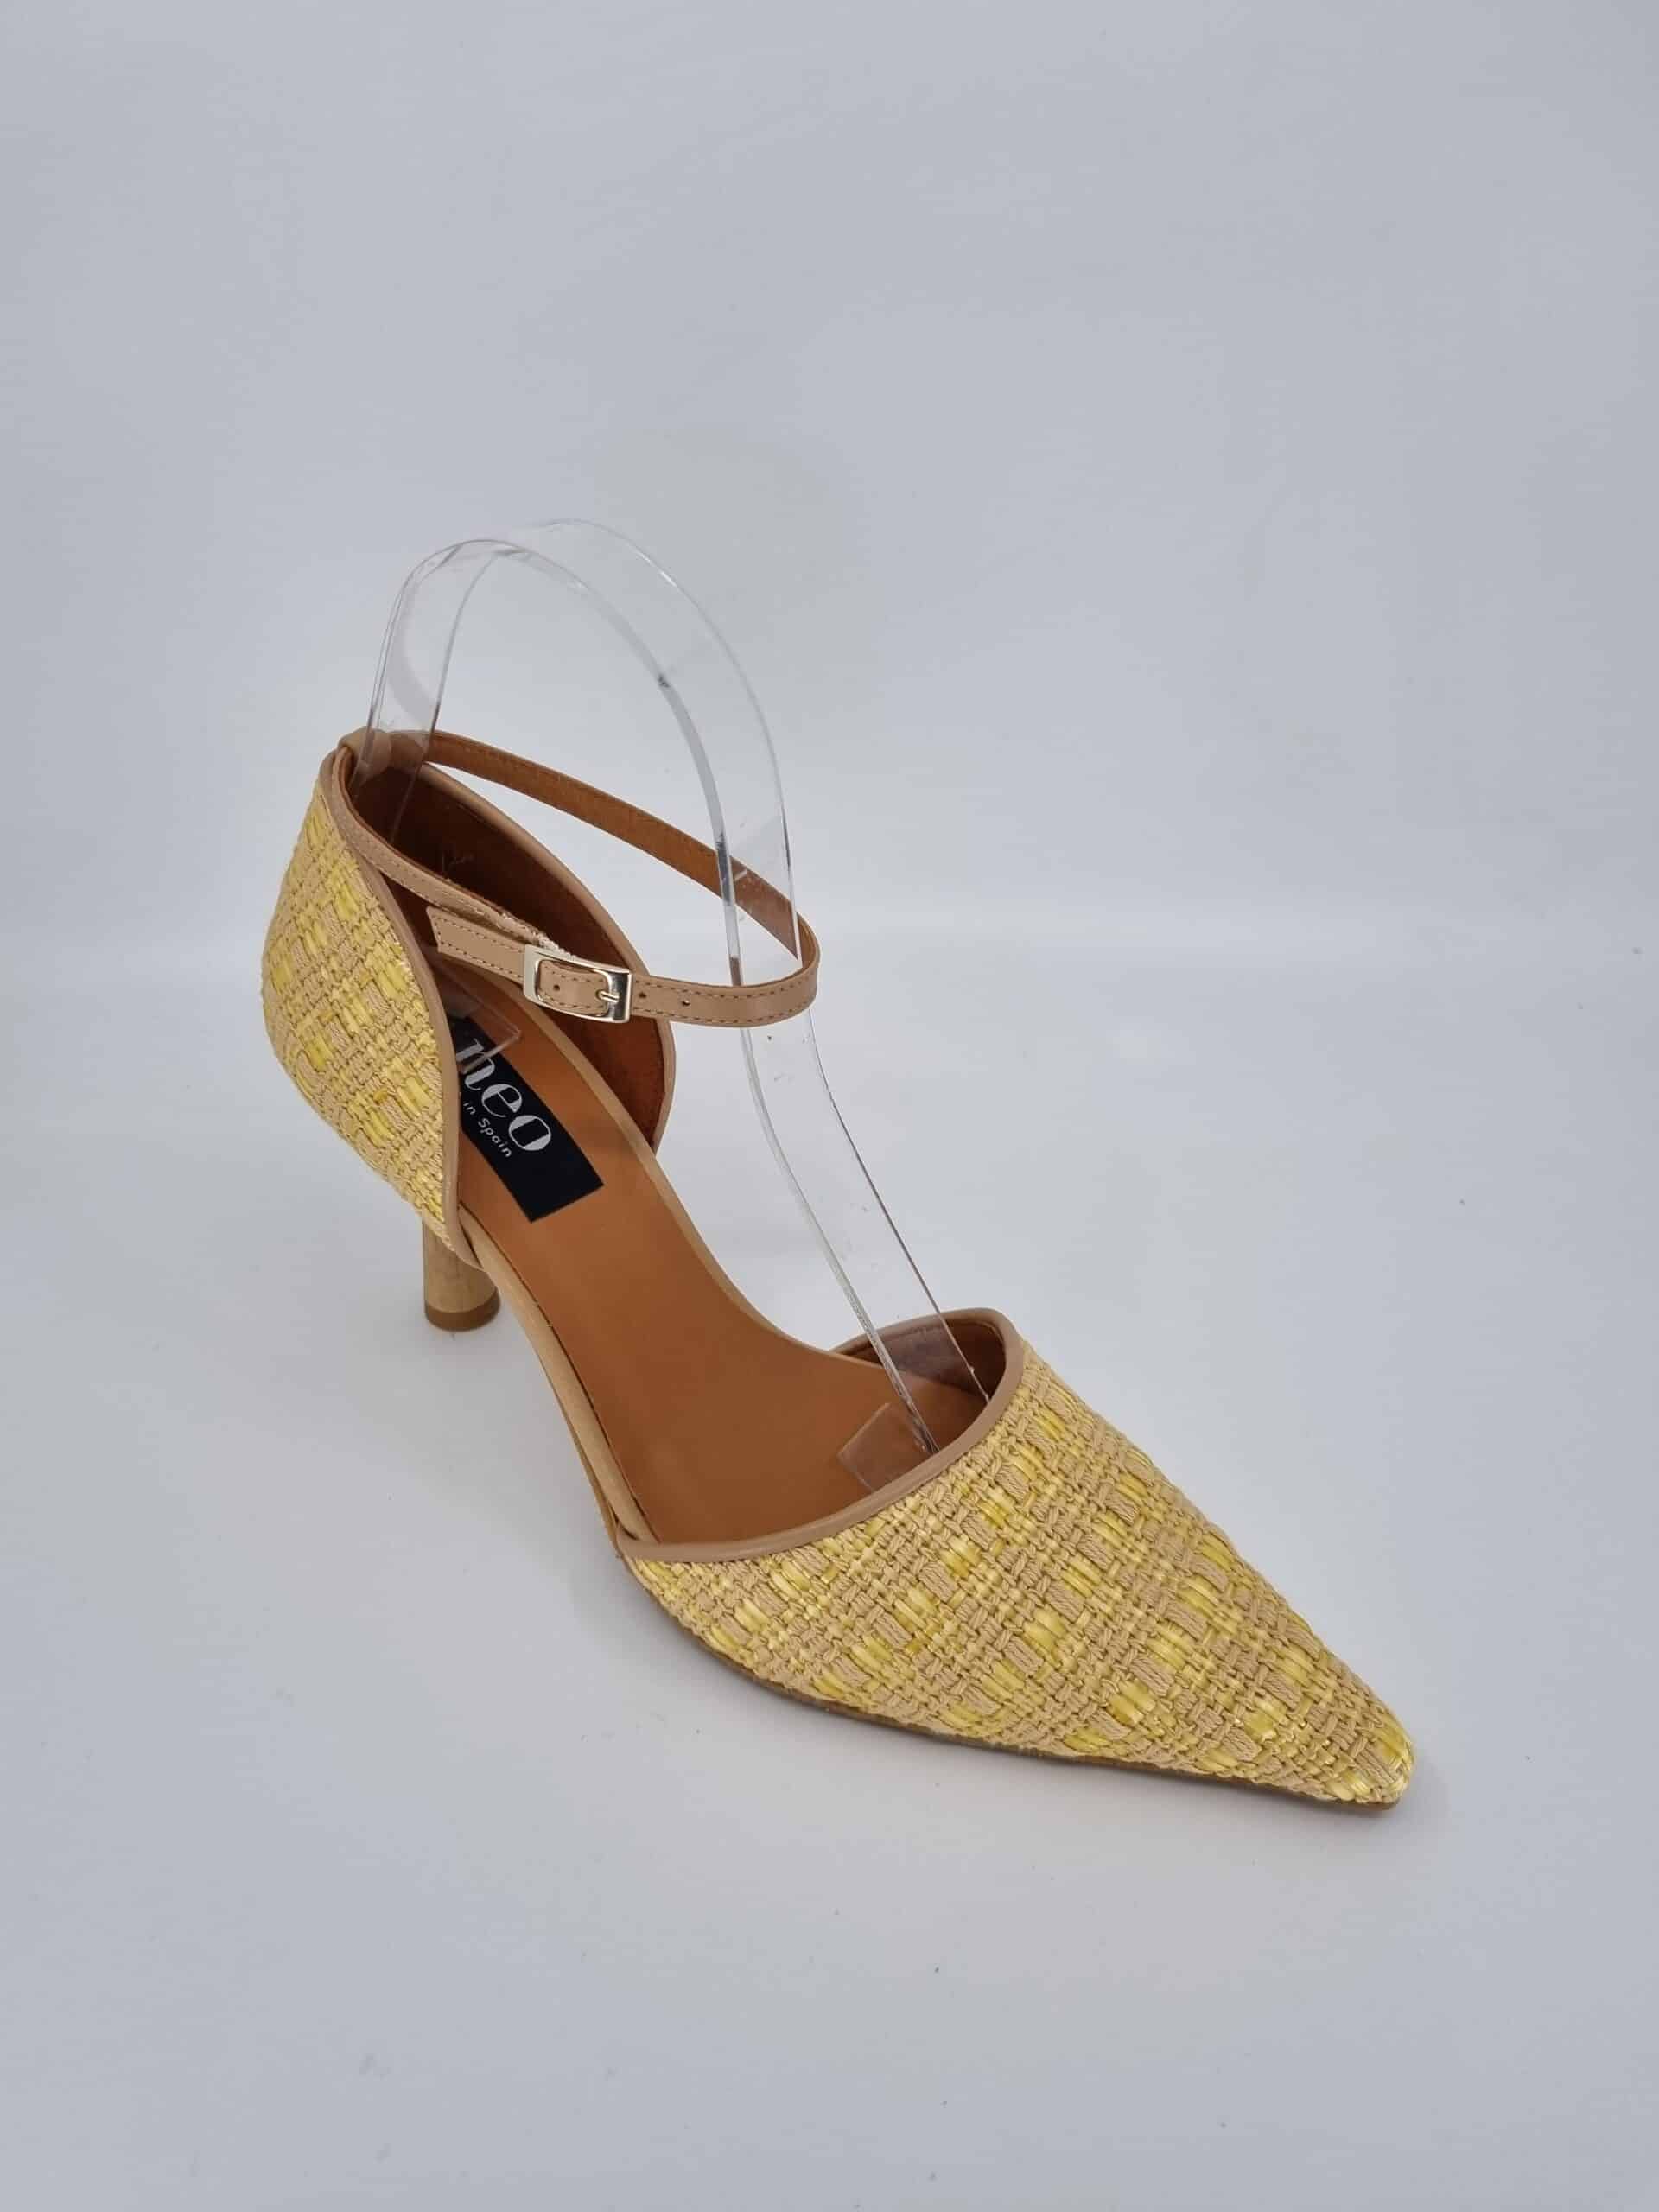 Joan's Shoes | Imported Italian Shoes & Accessories | Heels | Australia